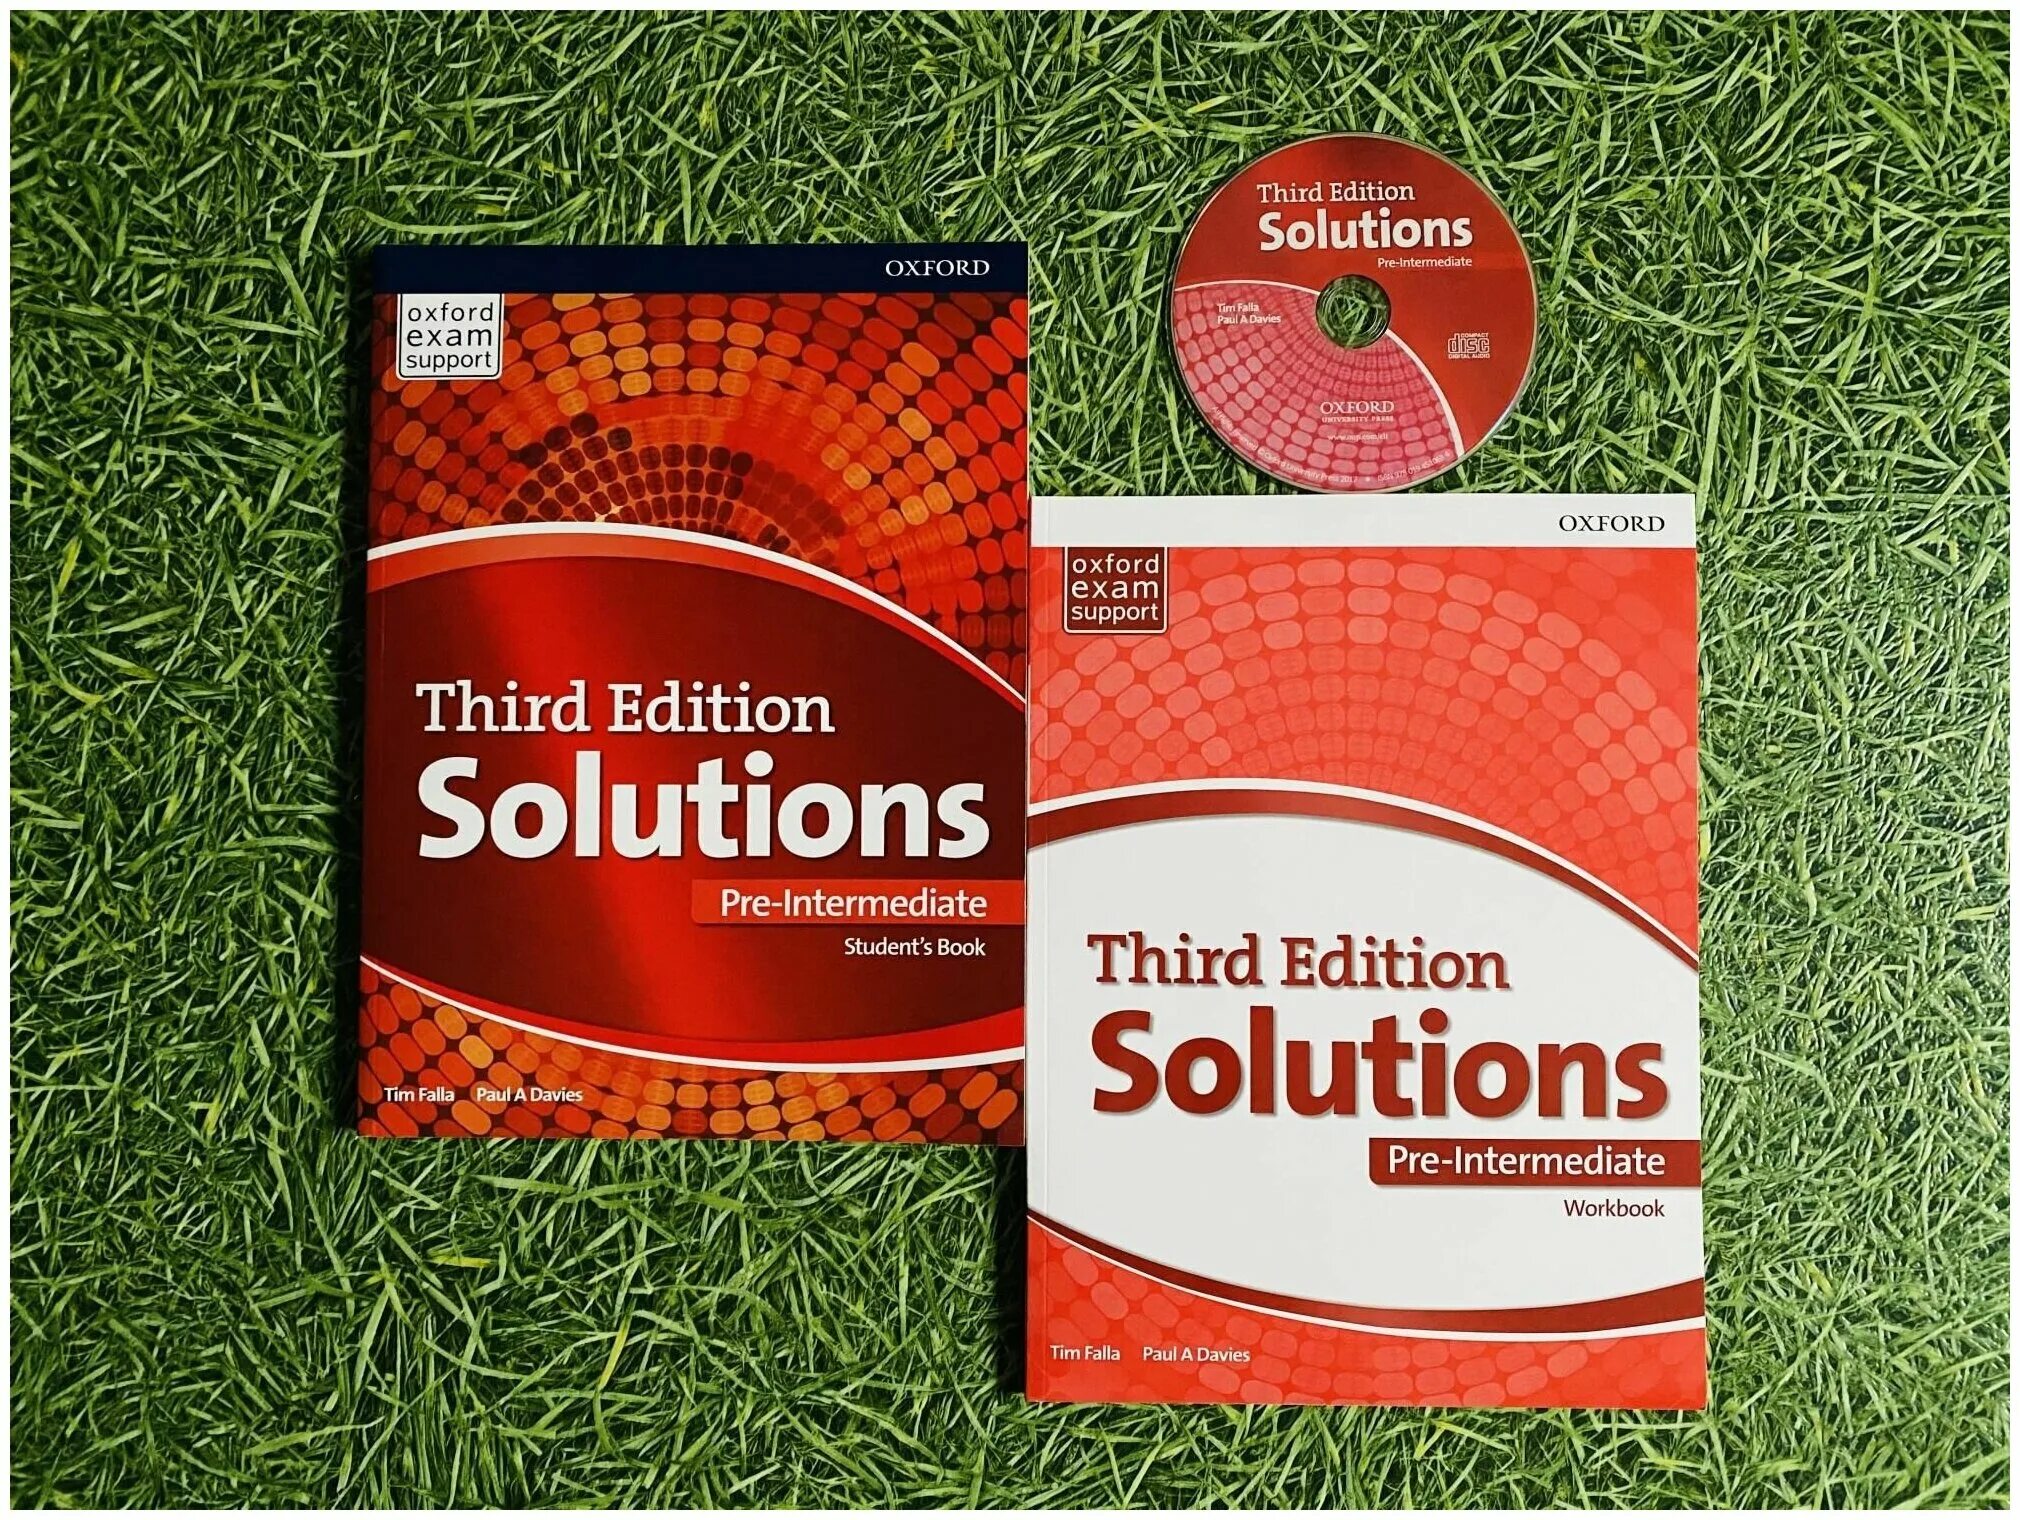 Solutions elementary pdf. Solutions: pre-Intermediate. Solutions учебник. Solutions pre-Intermediate 3rd. Third Edition solutions.